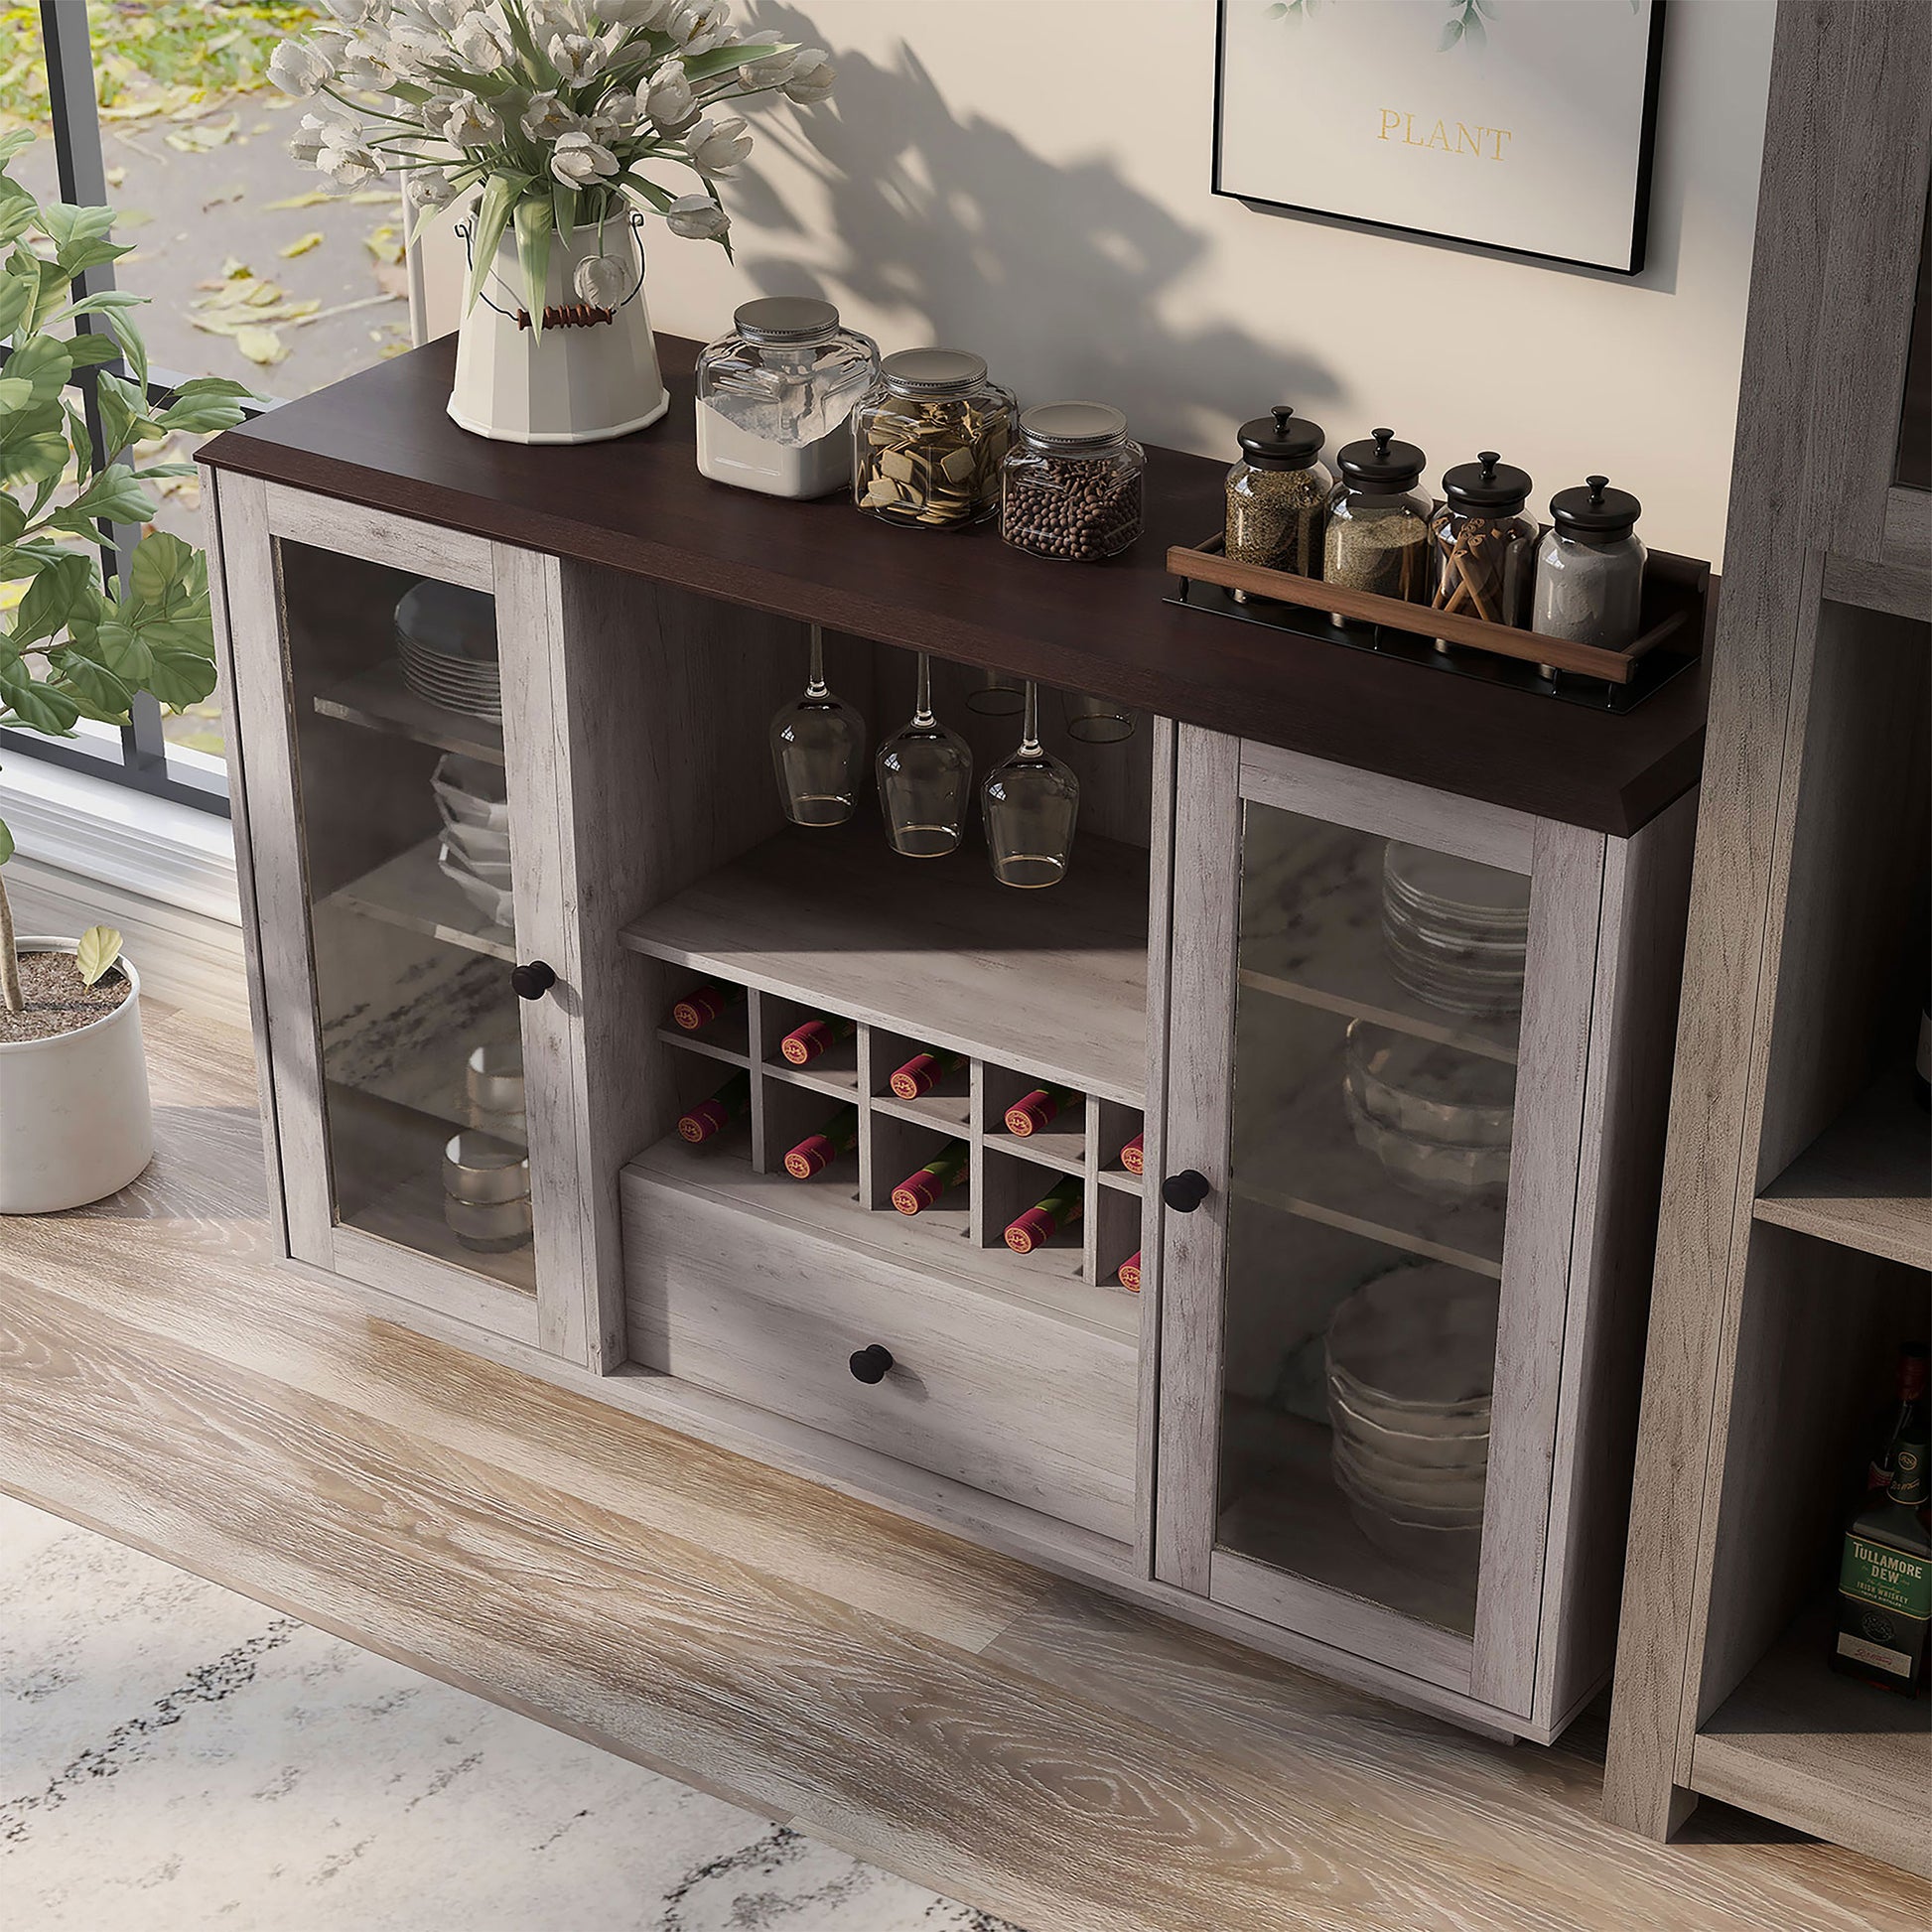 Left angled bird's eye view of a transitional coastal white six-shelf 10-bottle wine cabinet with glass doors in a dining room with accessories